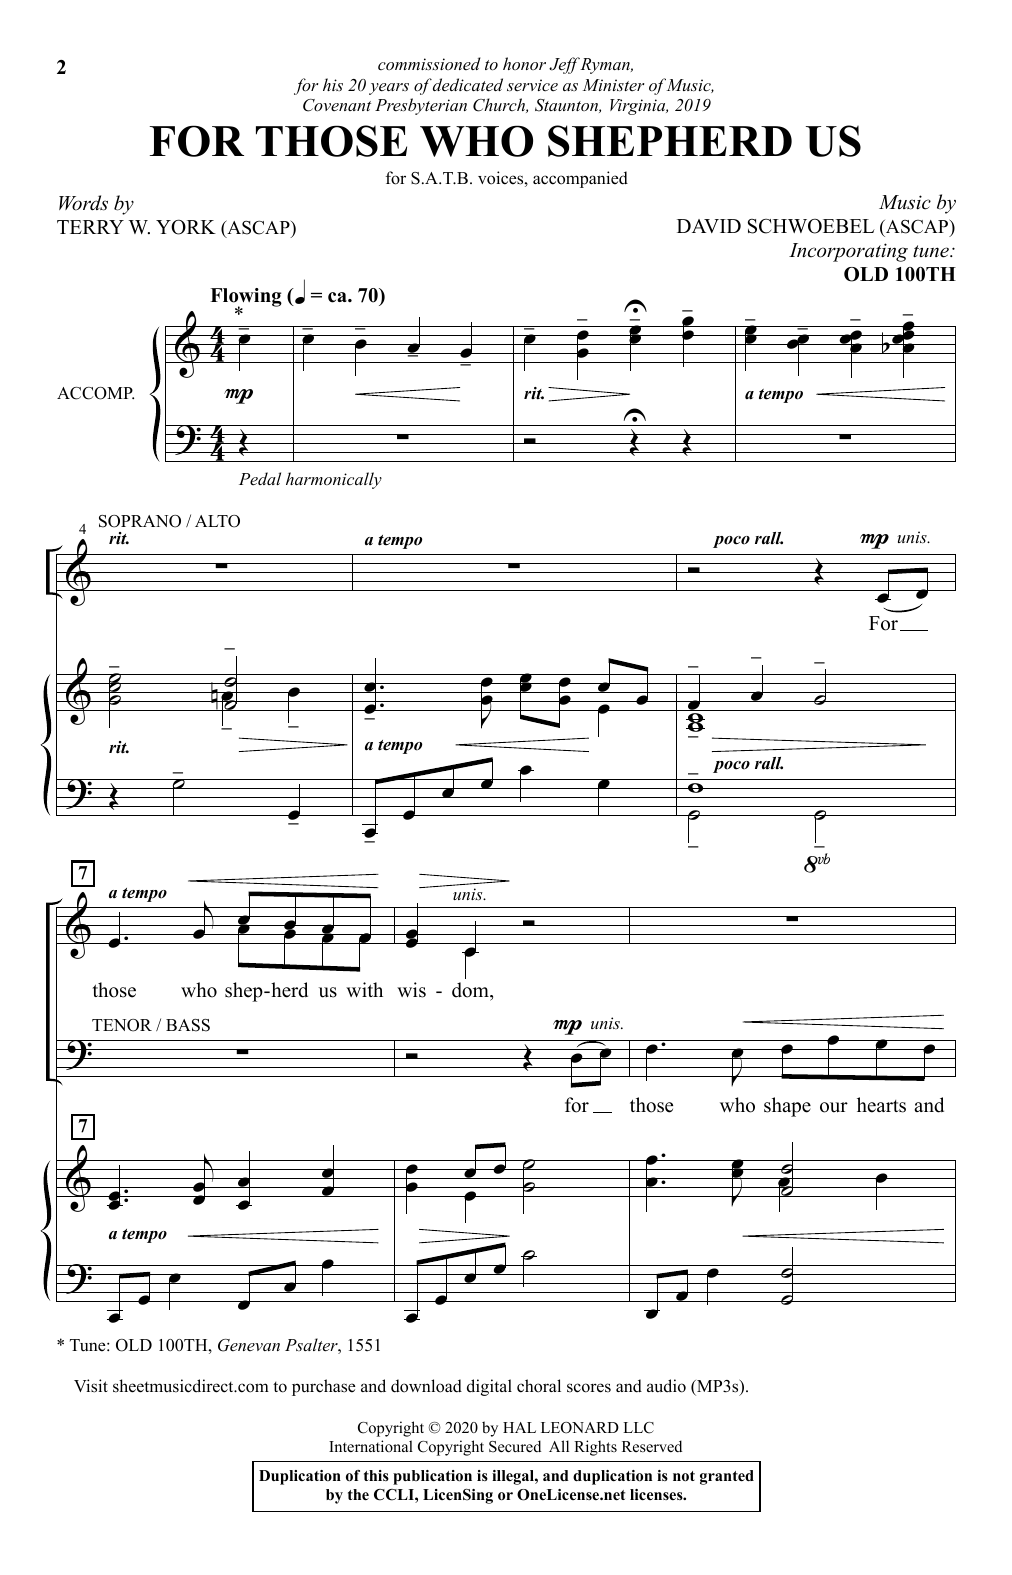 Download Terry W. York and David Schwoebel For Those Who Shepherd Us Sheet Music